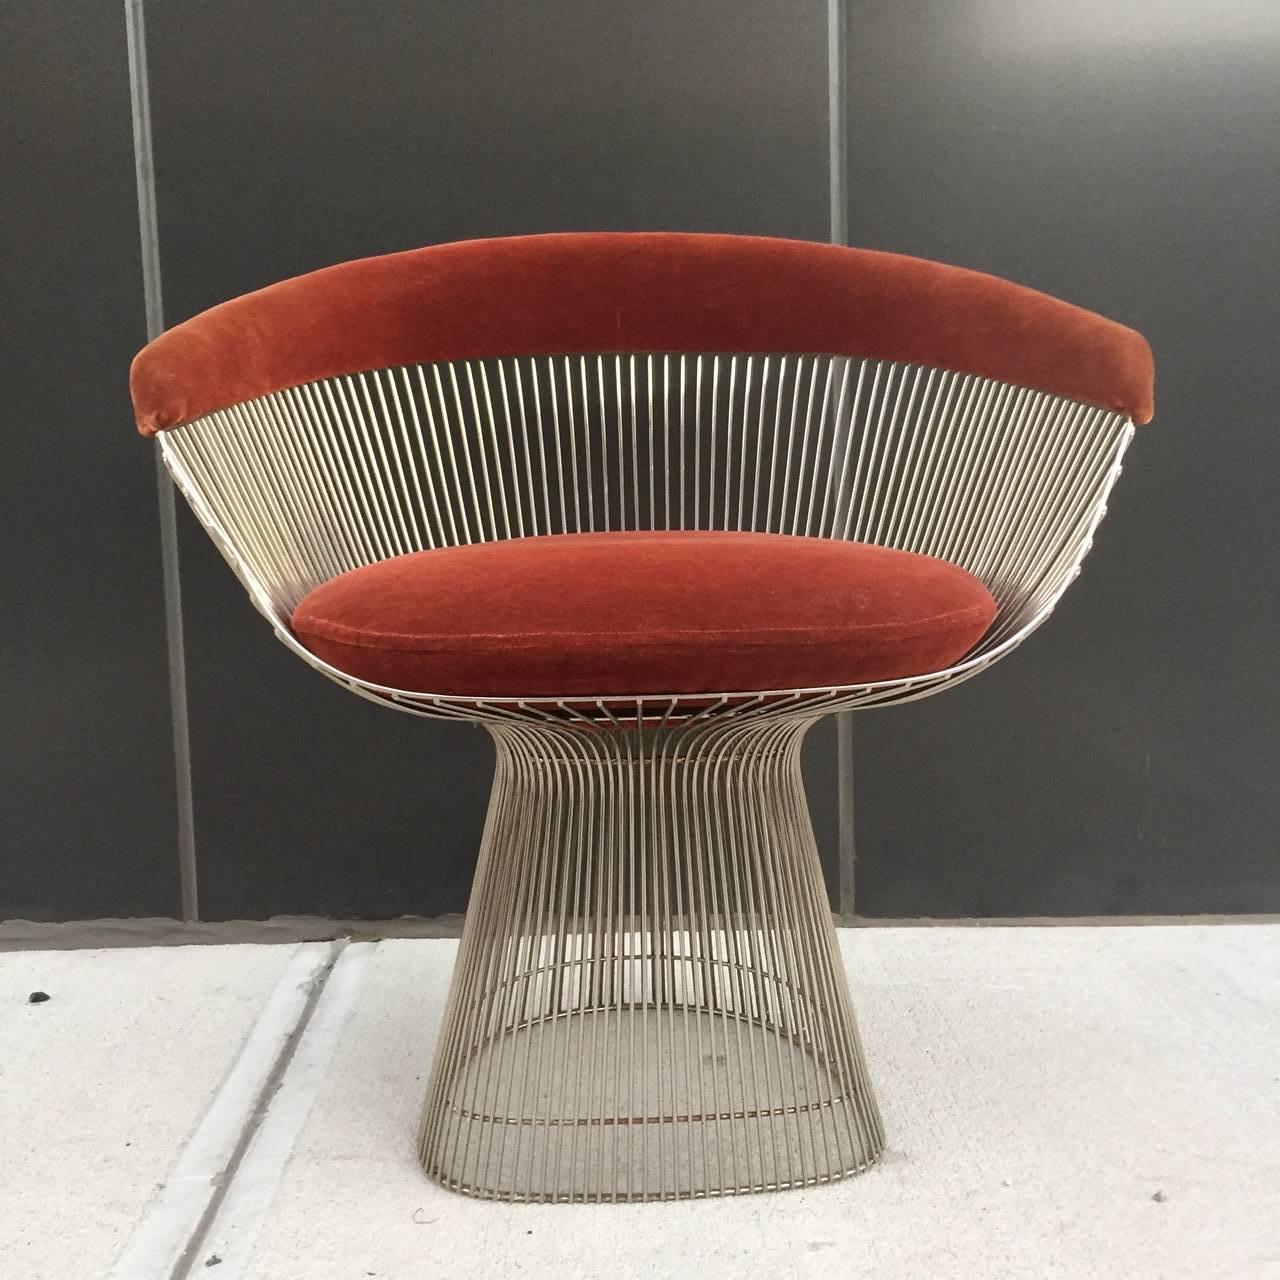 Plated Warren Platner for Knoll Mid-Century Modern Accent Wire Chair